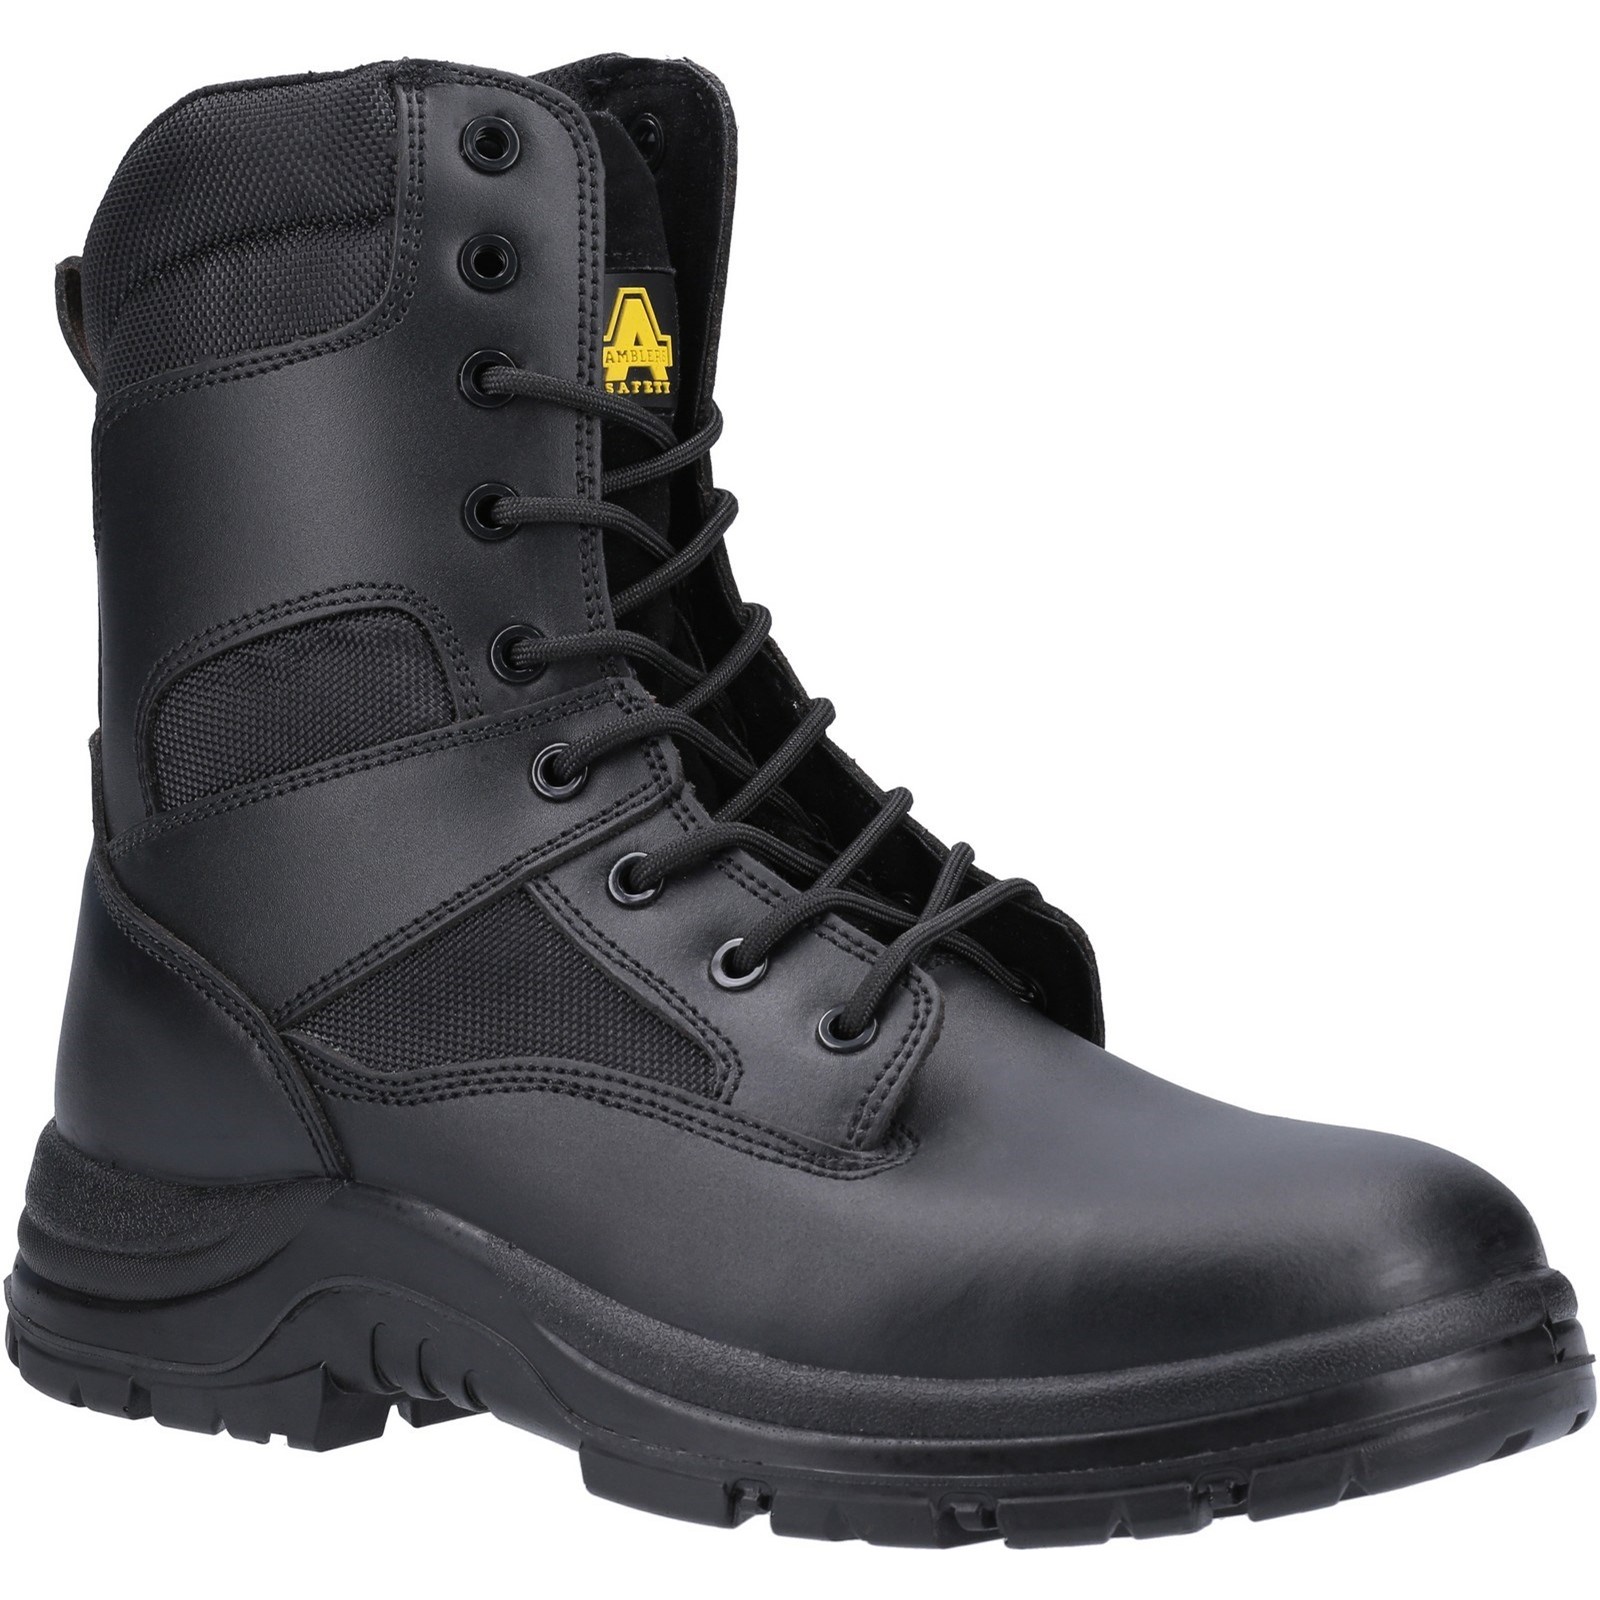 FS009C Water Resistant Hi-leg Lace up Safety Boot